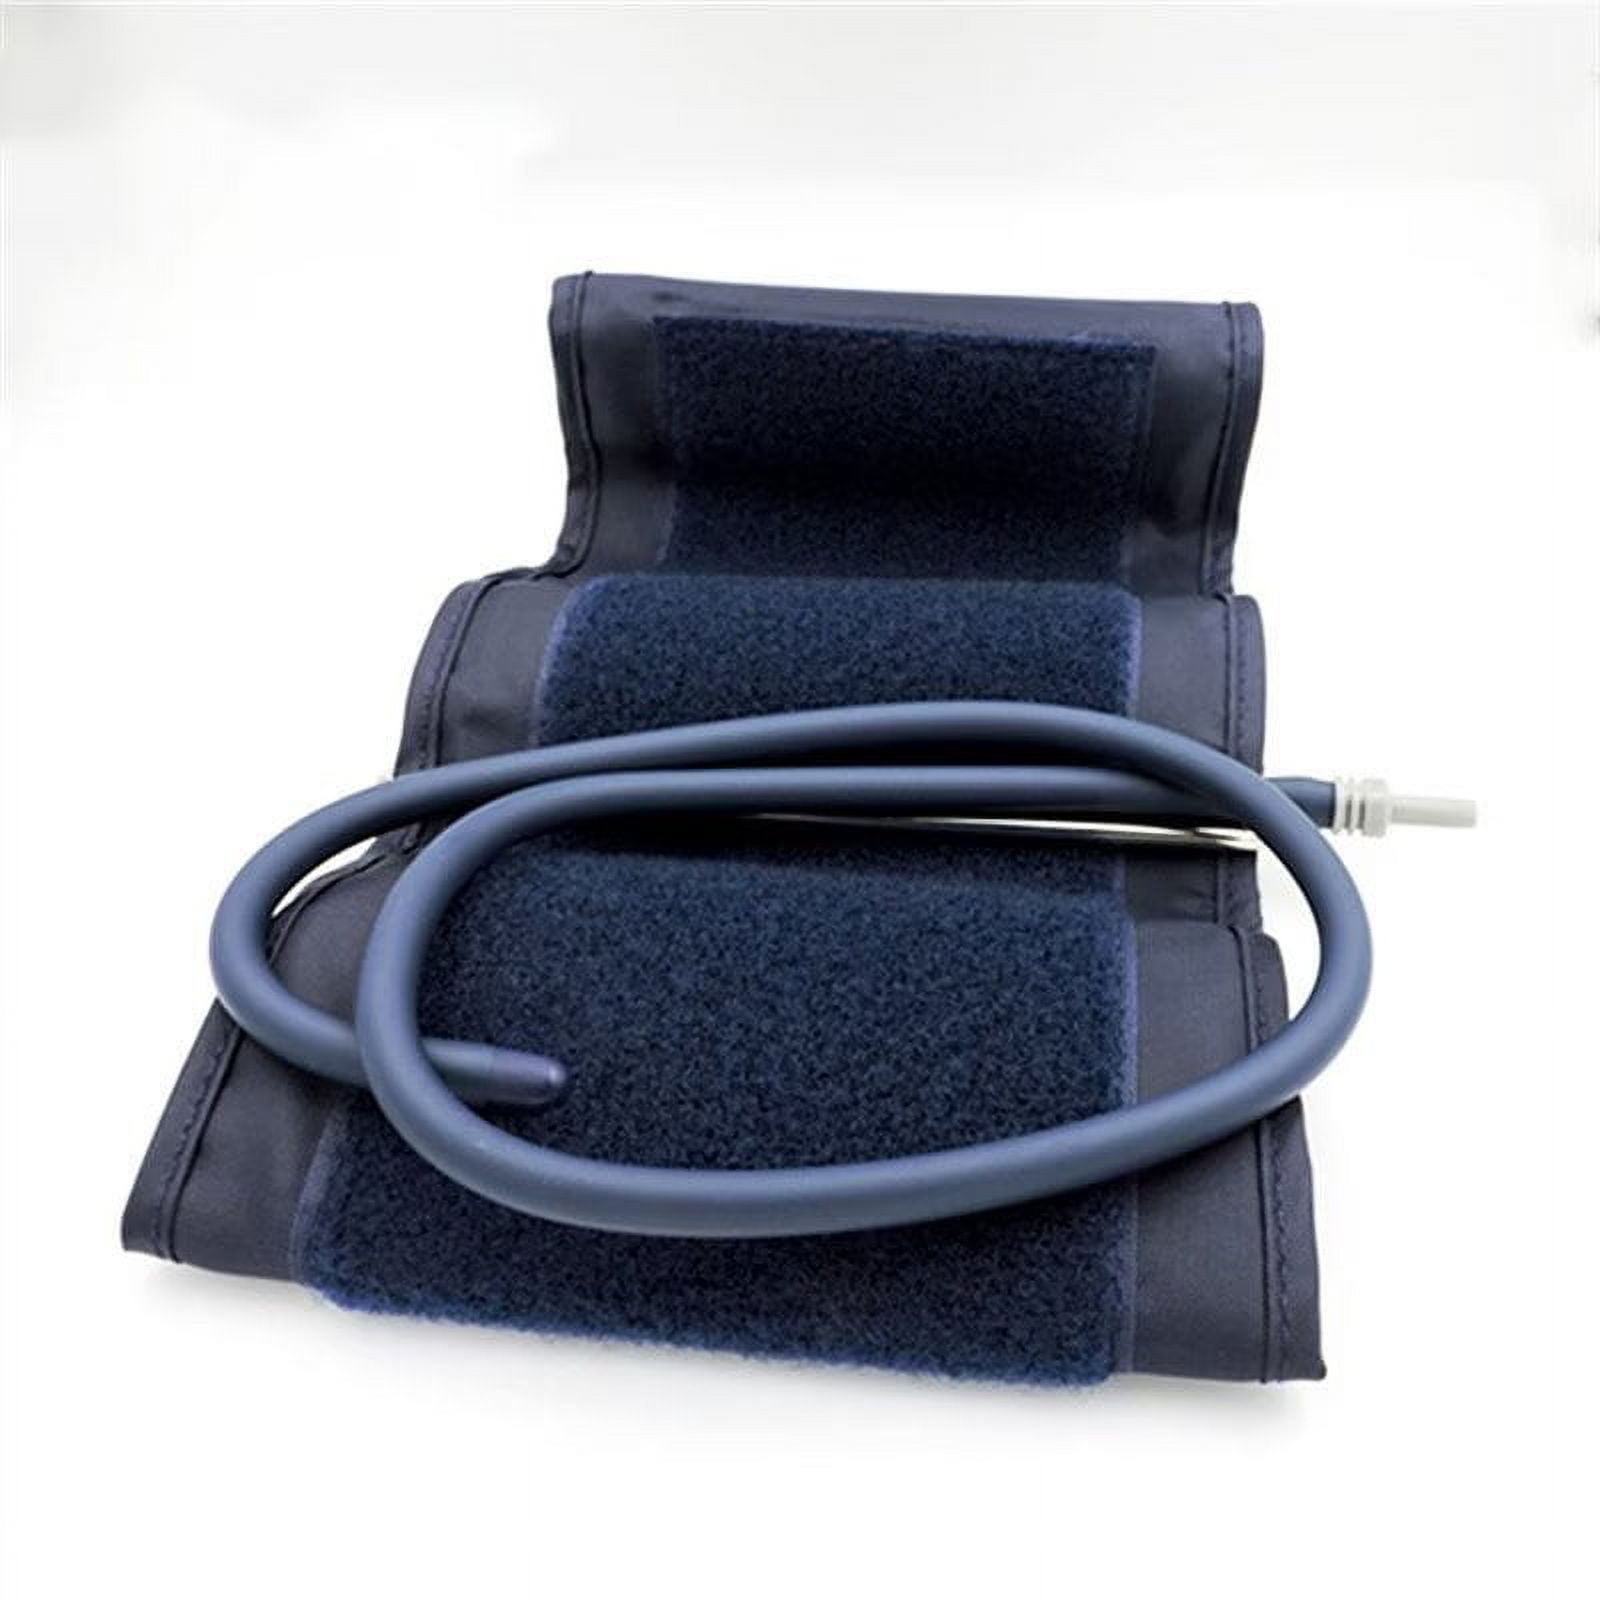 Extra Large Blood Pressure Cuff, Replacement Extra Large Cuff Applicable  for 9”-20.5” Inches (22-52CM) Big Arm